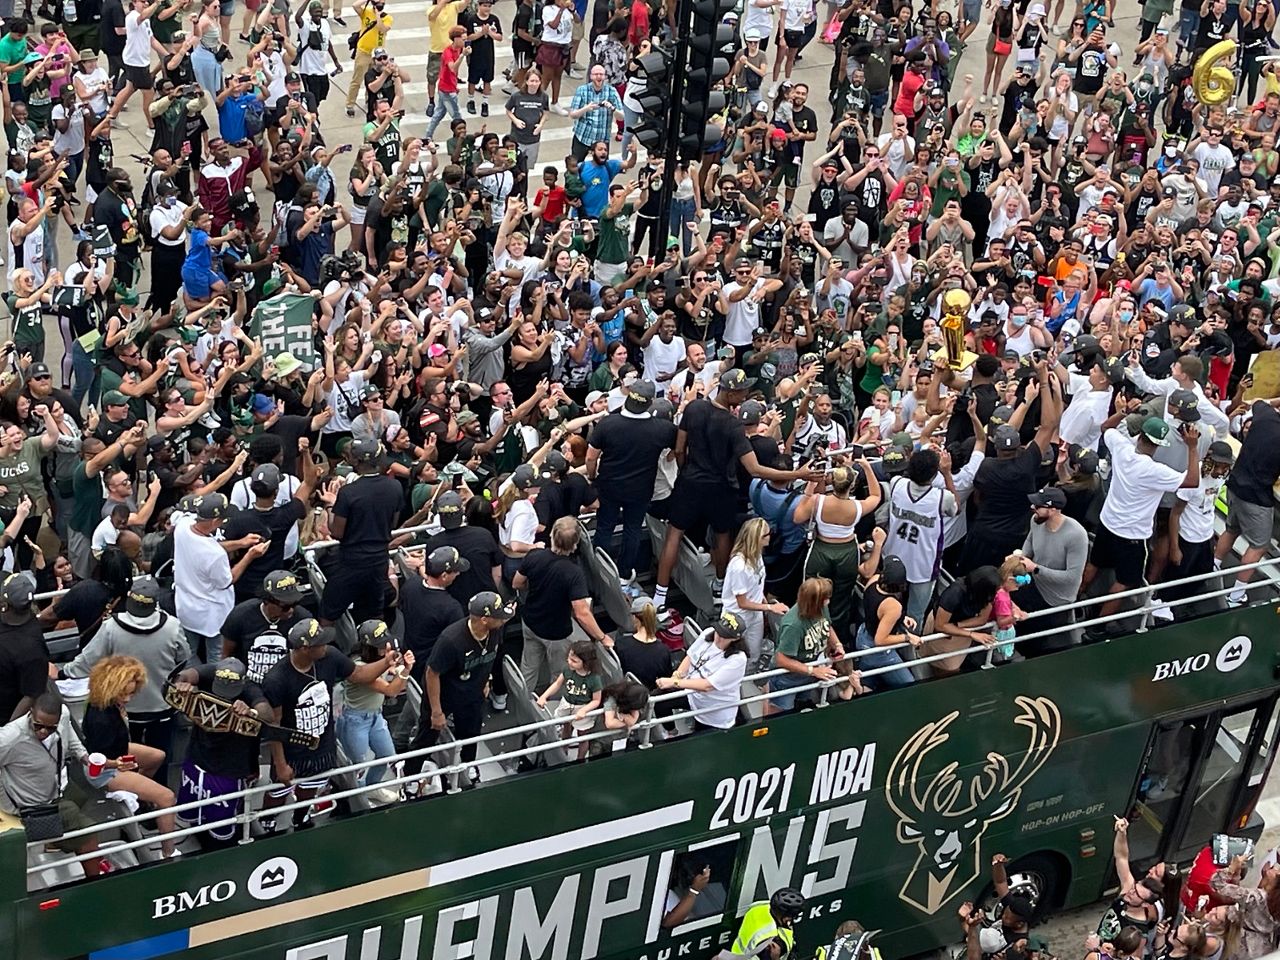 Spectrum News 1's favorite moments from Bucks' parade